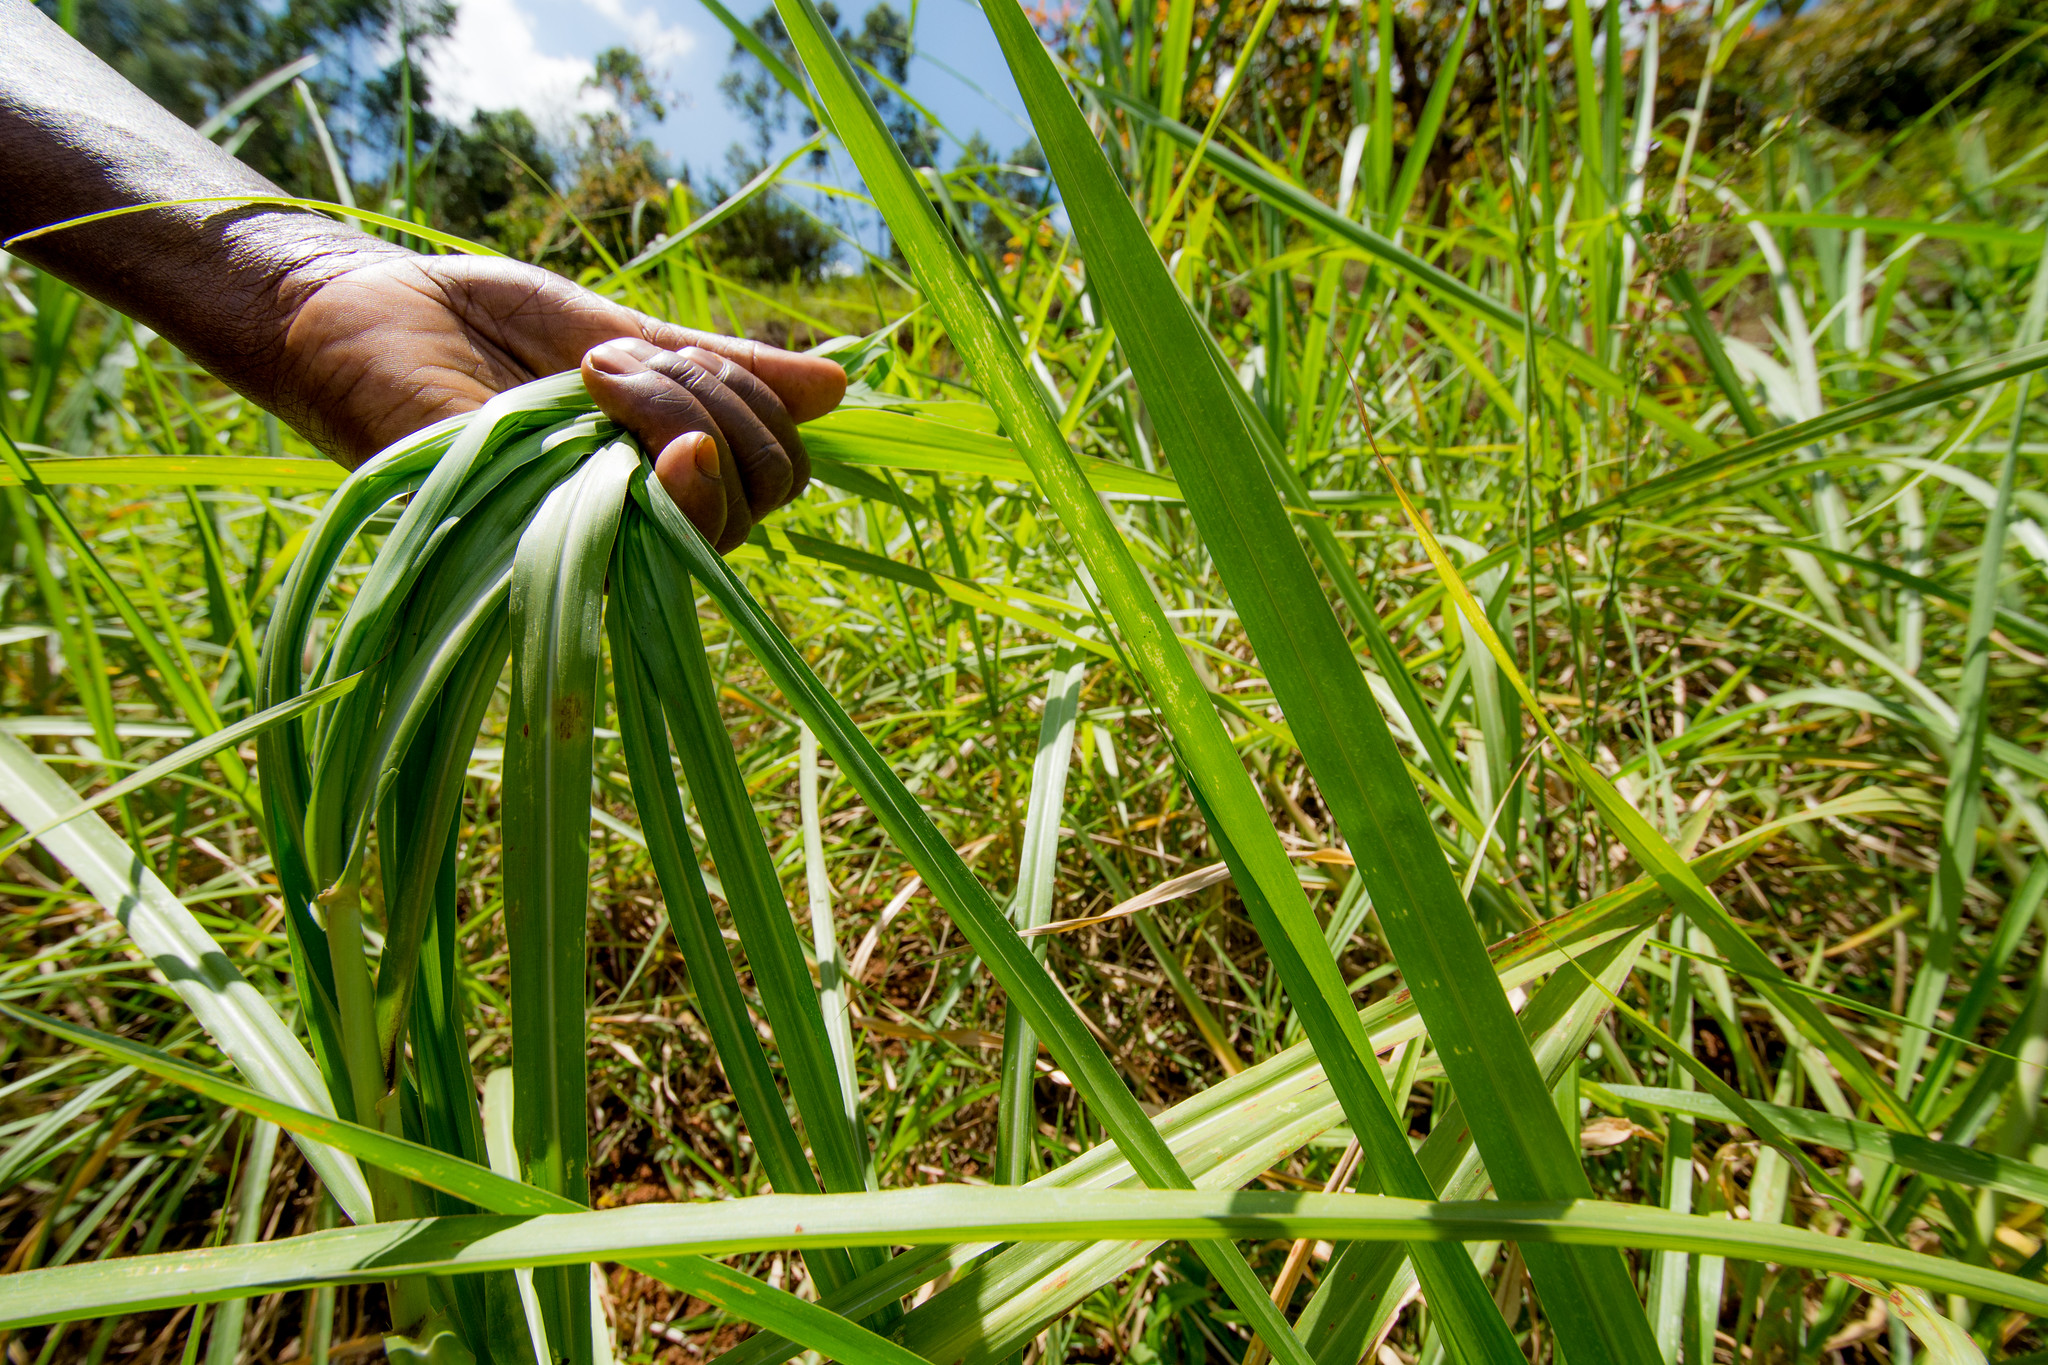 Napier grass is planted by farmers to prevent soil erosion in Kenya's Tana River Basin. (Photo: Georgina Smith/CIAT)